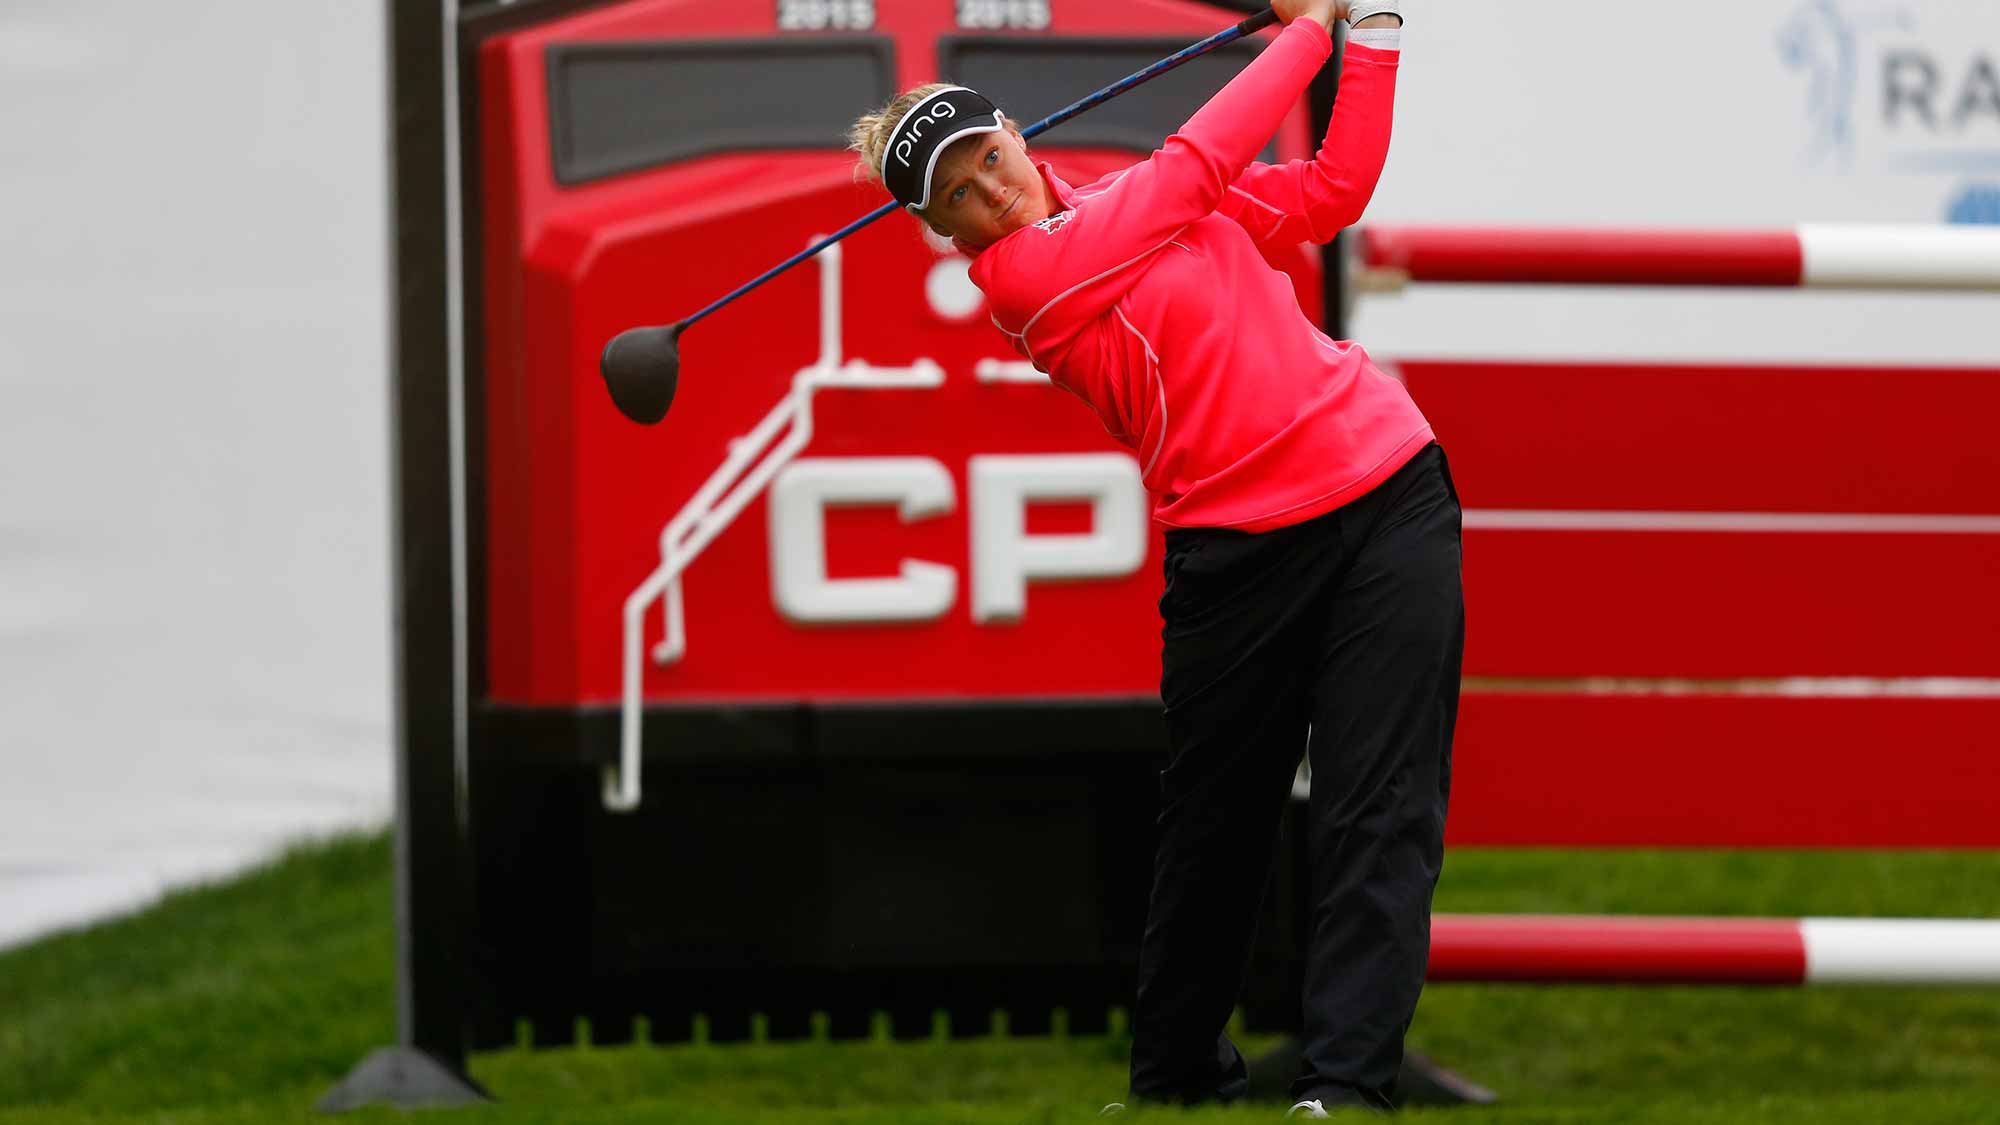 Brooke Henderson of Canada tees off on the first hole during the third round of the Canadian Pacific Women's Open at Priddis Greens Golf and Country Club